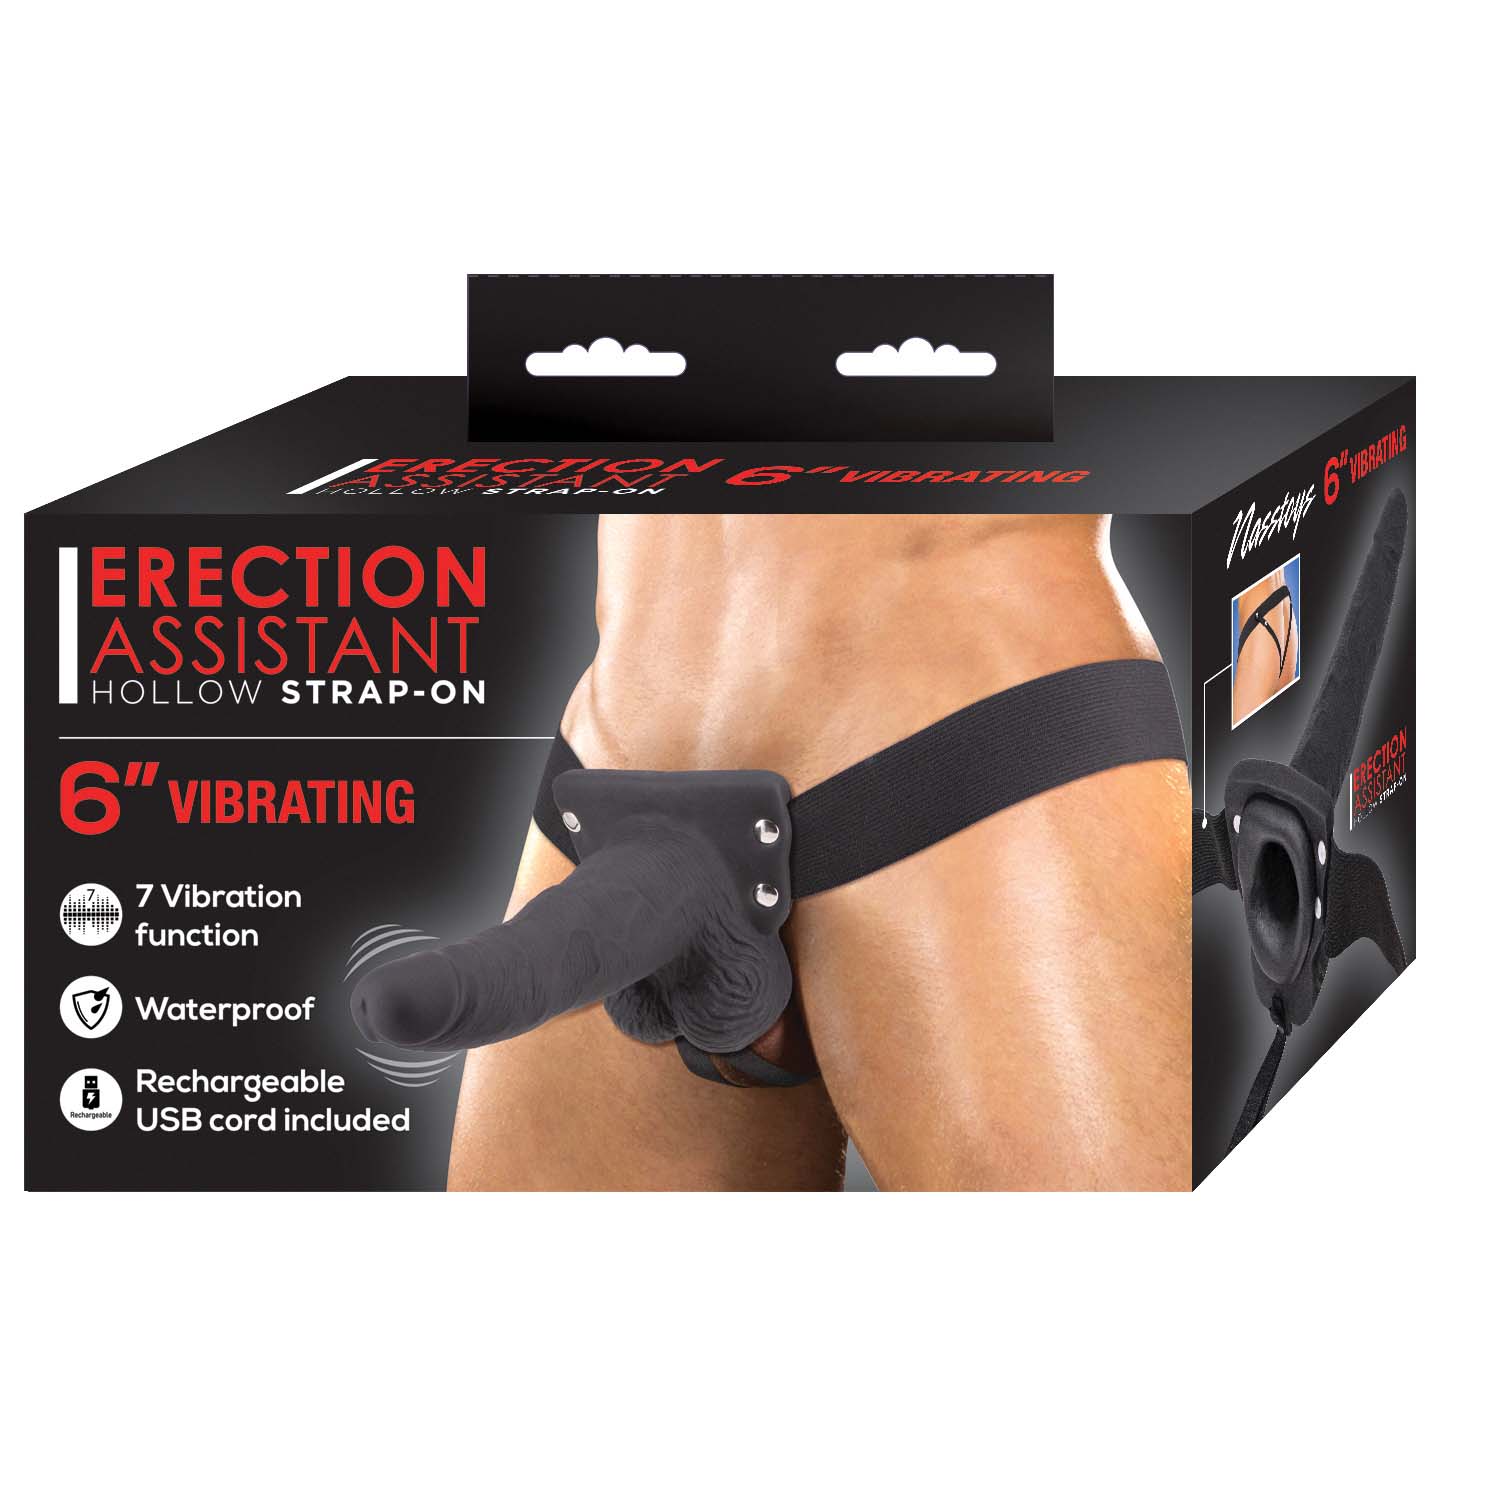 ERECTION ASSISTANT HOLLOW STRAP-ON 6 VIBRATING BLACK " - Click Image to Close